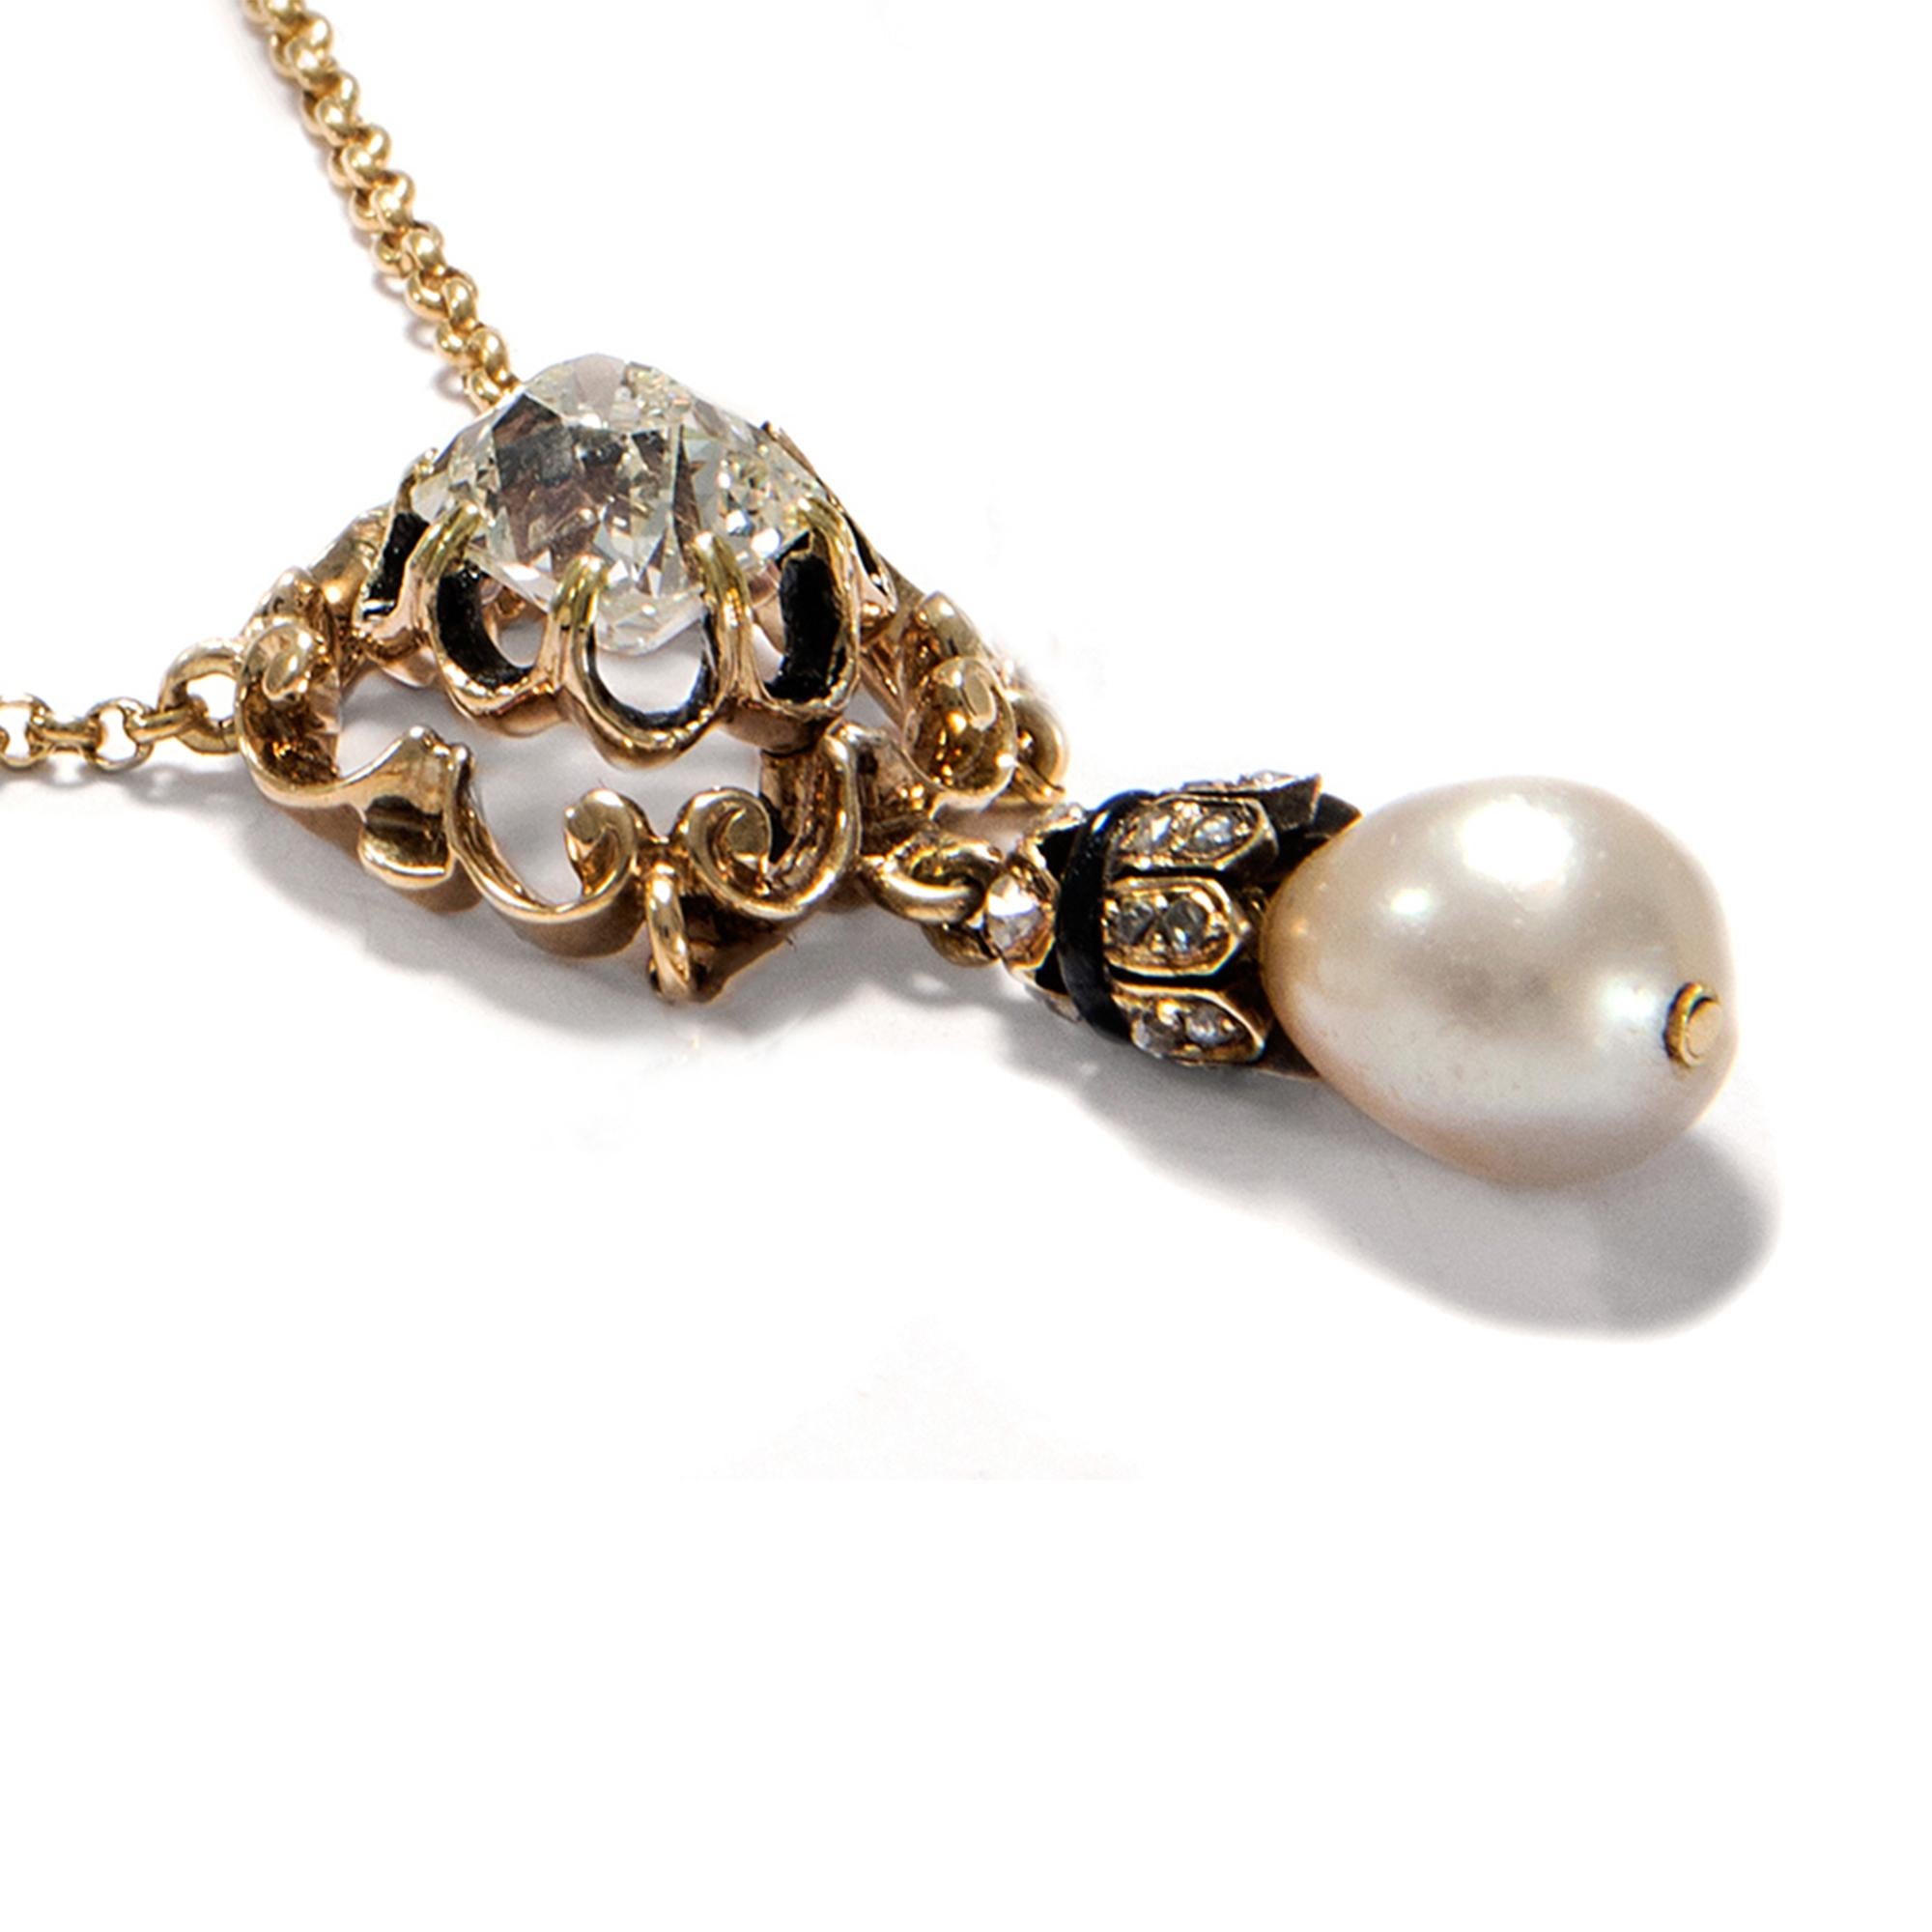 Late Victorian Victorian circa 1890 2.0 ct Old Mine Cut Diamond and Natural Pearl Gold Necklace